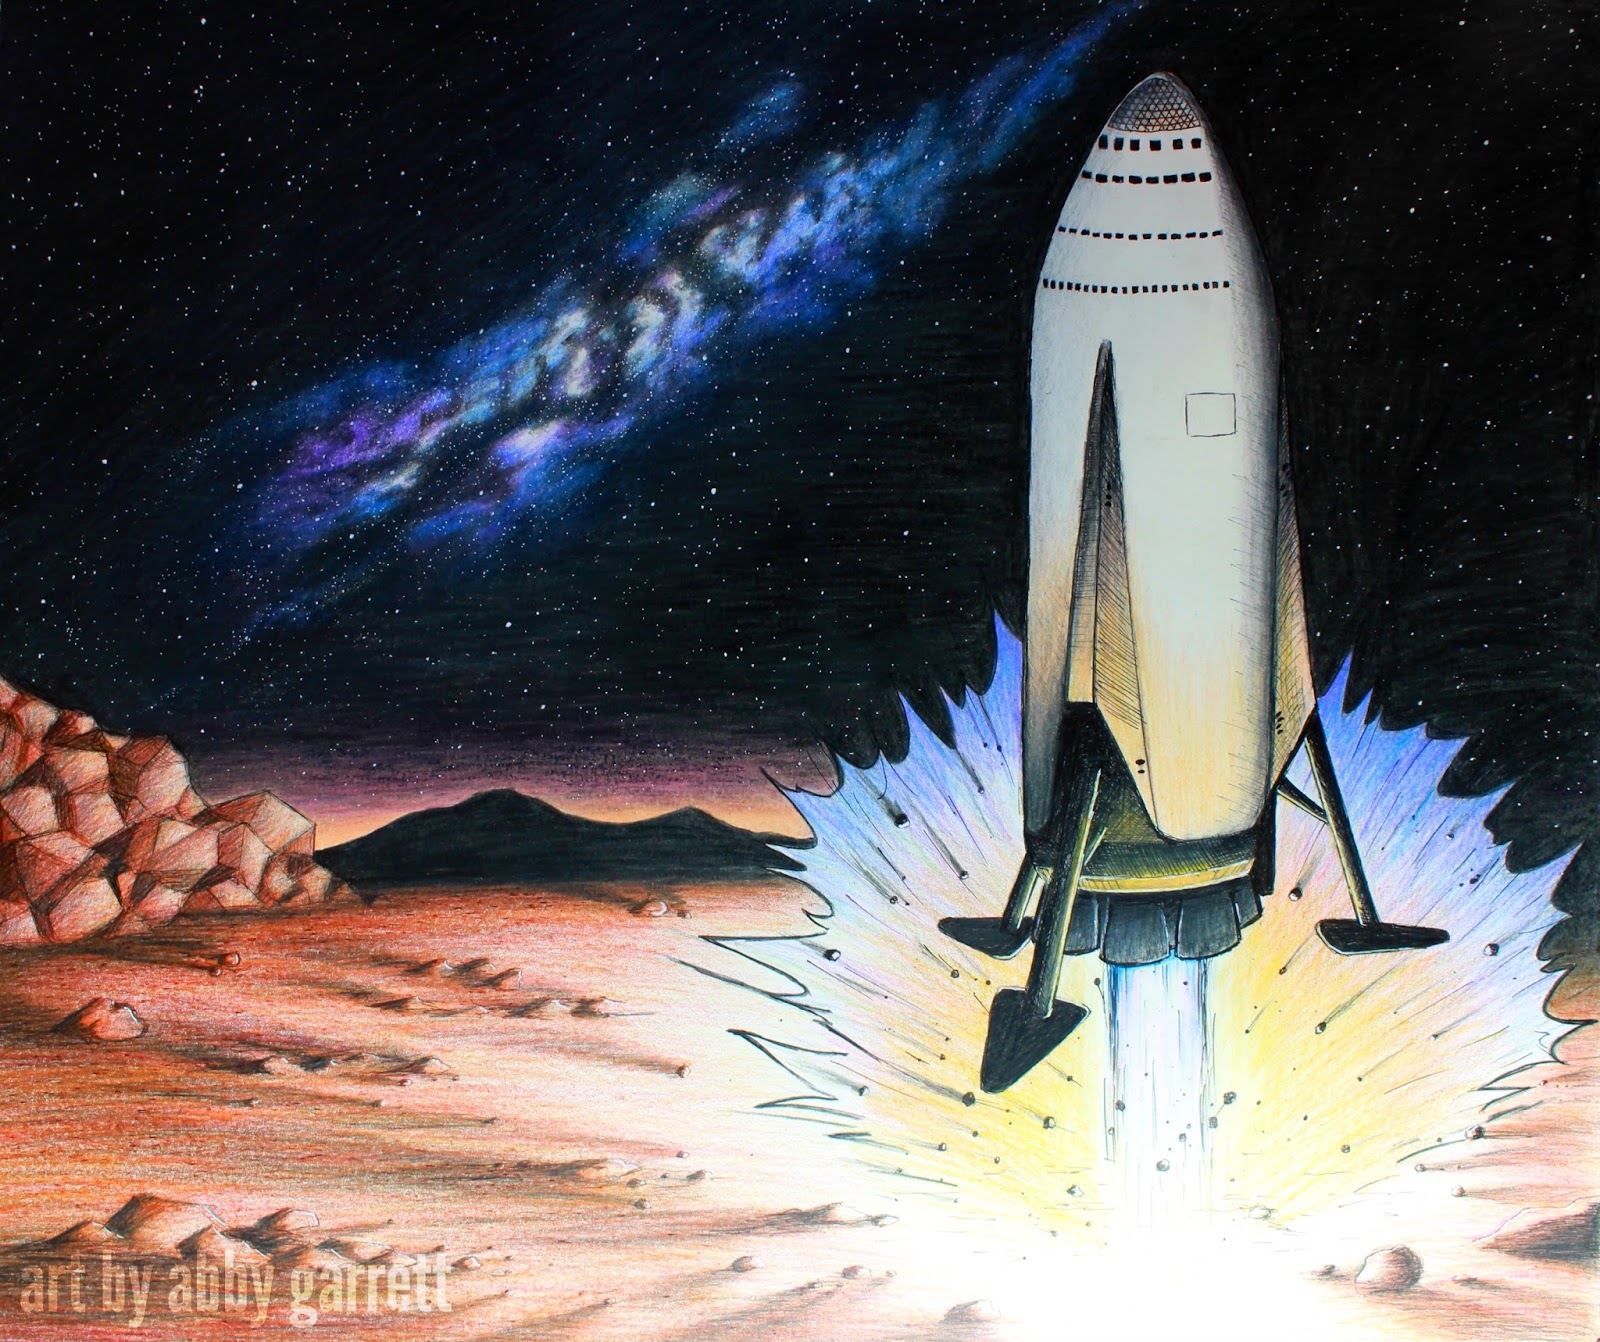 Drawing of SpaceX ITS spaceship landing on Mars by Abby Garrett